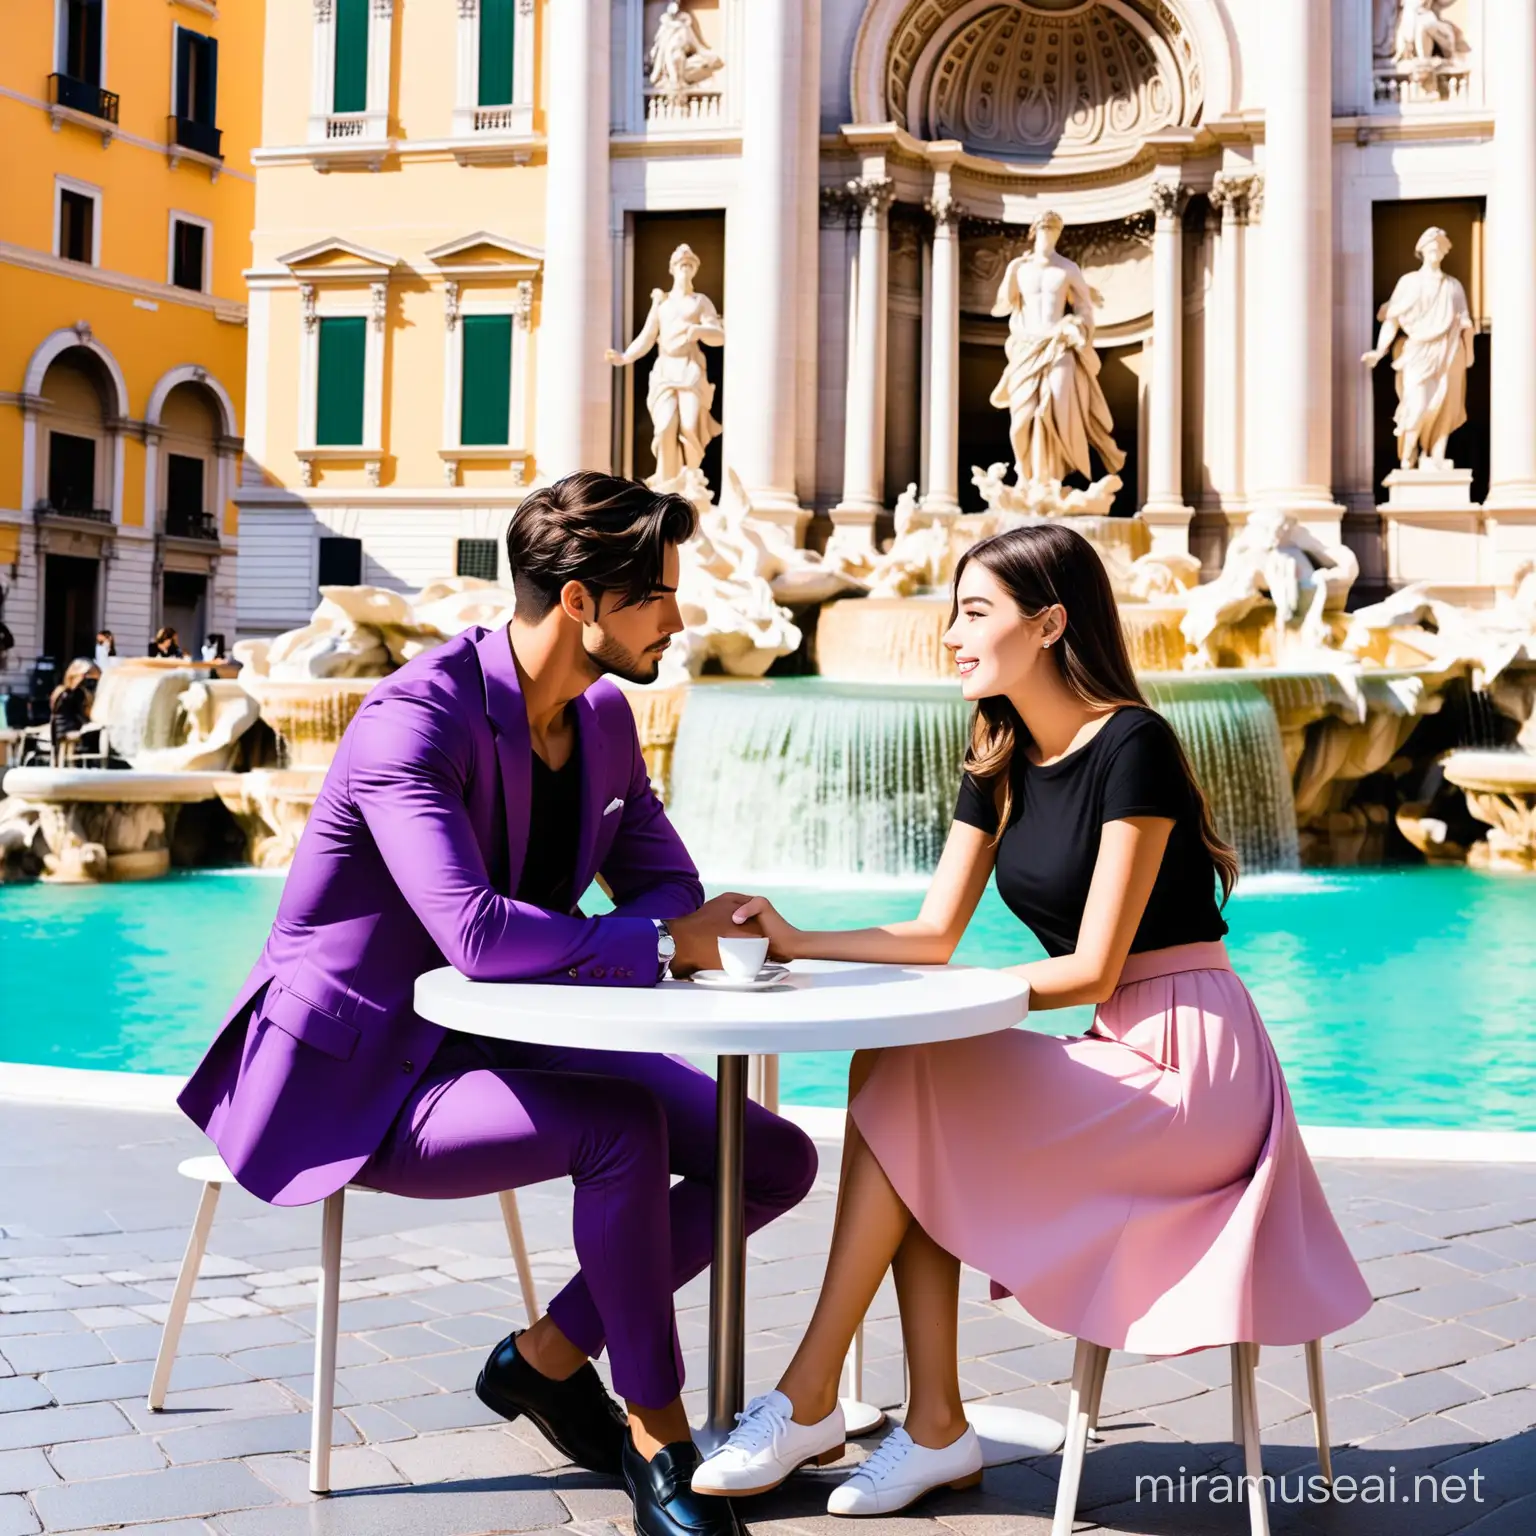 The background is the Trevi Fountain in Italy.

A handsome man and a beautiful woman sit at the cafe table and have a conversation.

Handsome and beautiful women are in their early 20s.

The handsome man wore a purple suit set and black shoes.

Beauty wore a black t-shirt and a light pink skirt and white shoes.

It's a romantic atmosphere.